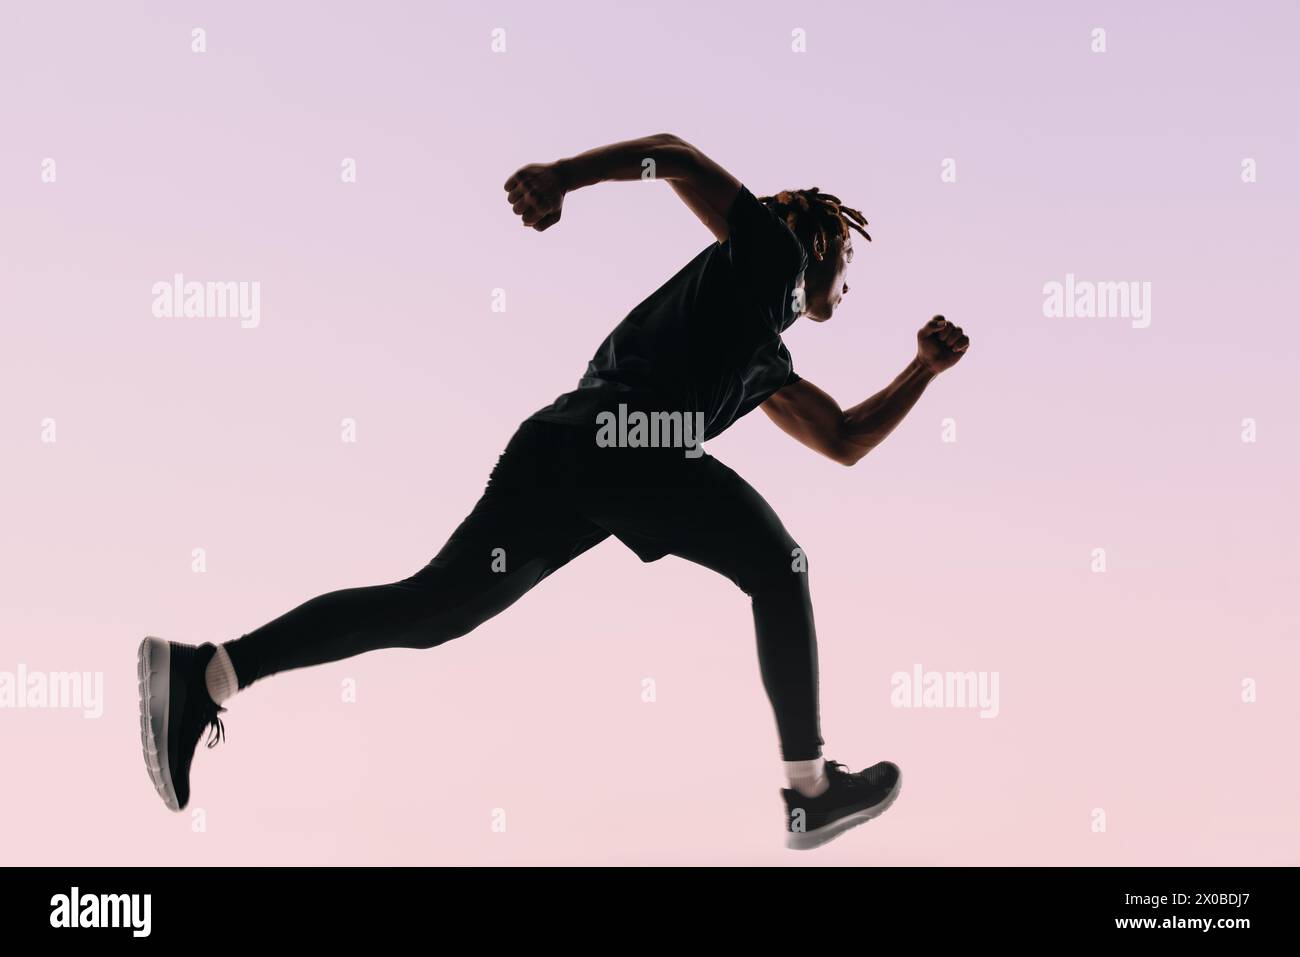 Athlete with dreadlocks showcases athleticism and form in a high-intensity workout. Against a pink backdrop, a silhouette of a runner jumps mid-air, e Stock Photo